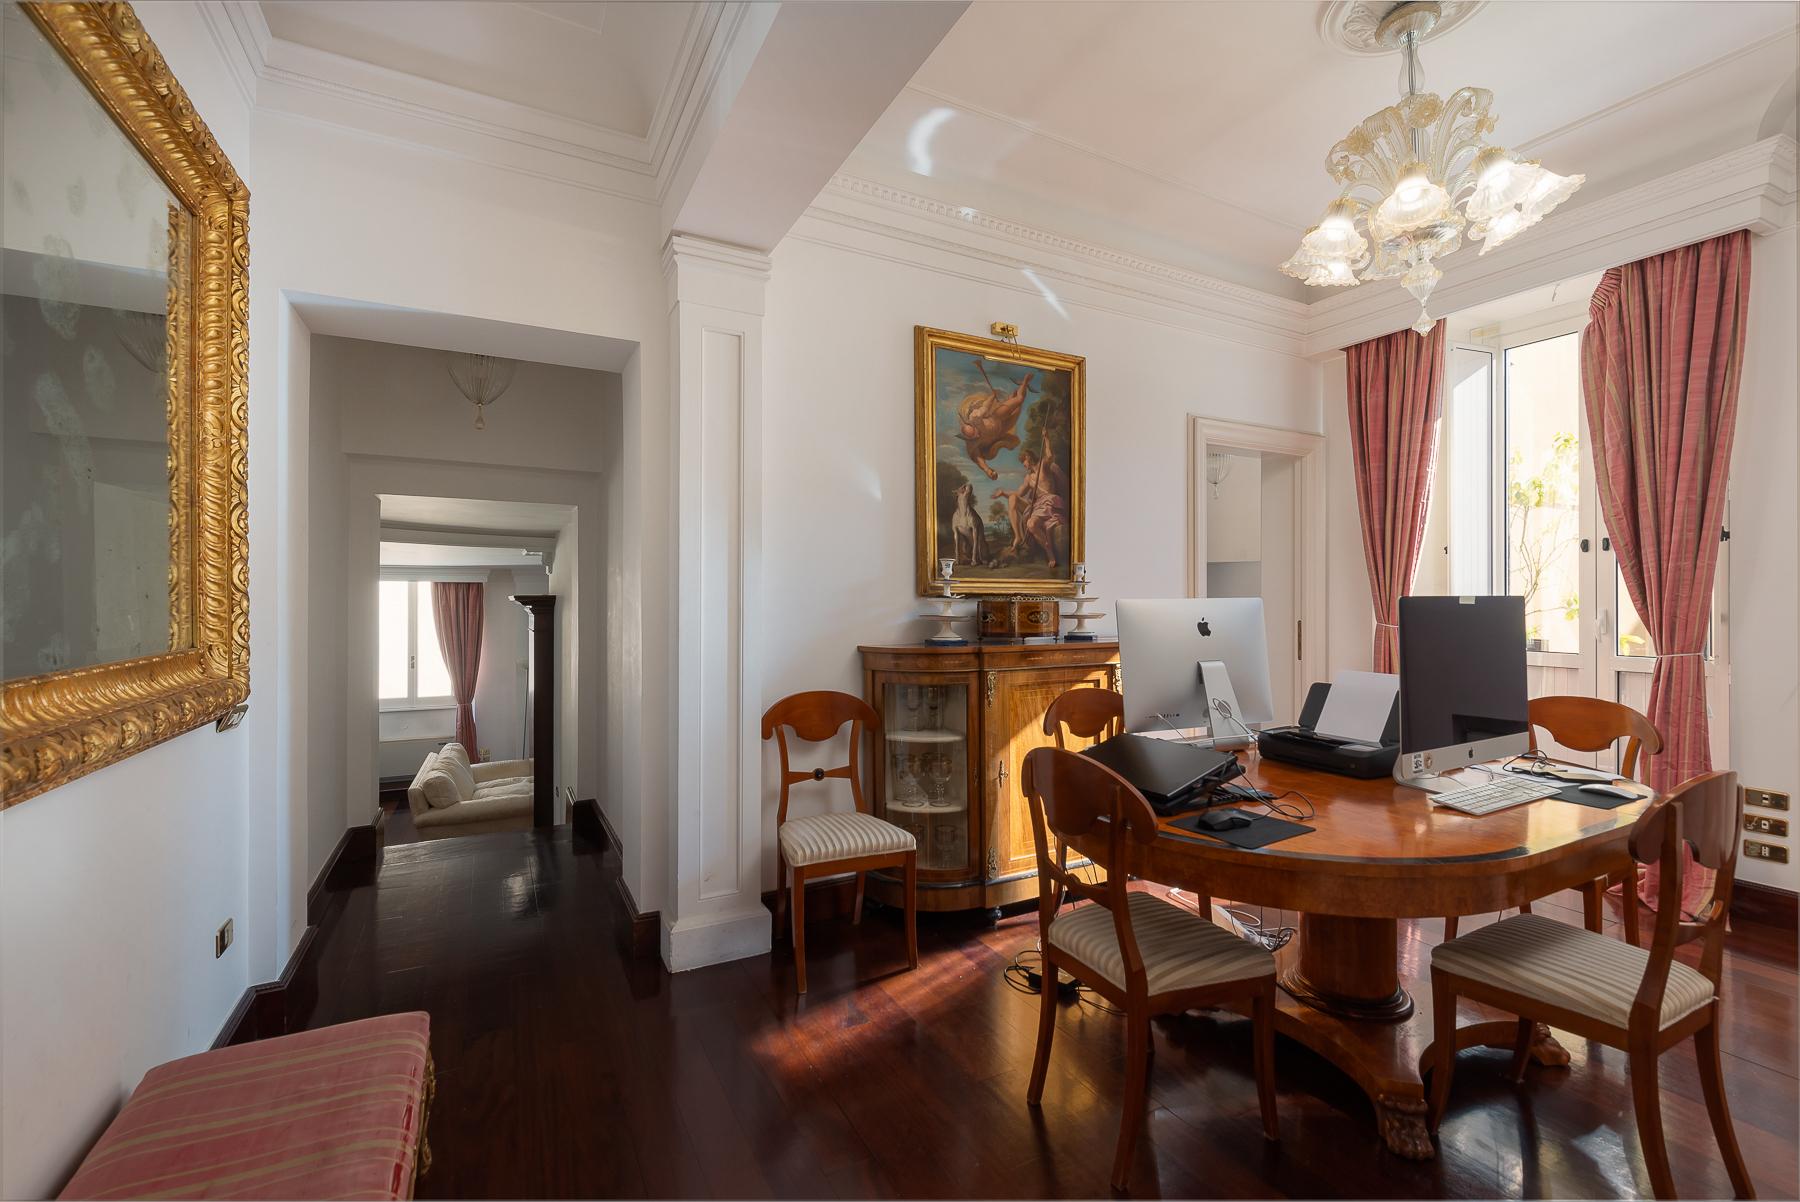 Marvelous pied a terre in an historic palazzo - 6